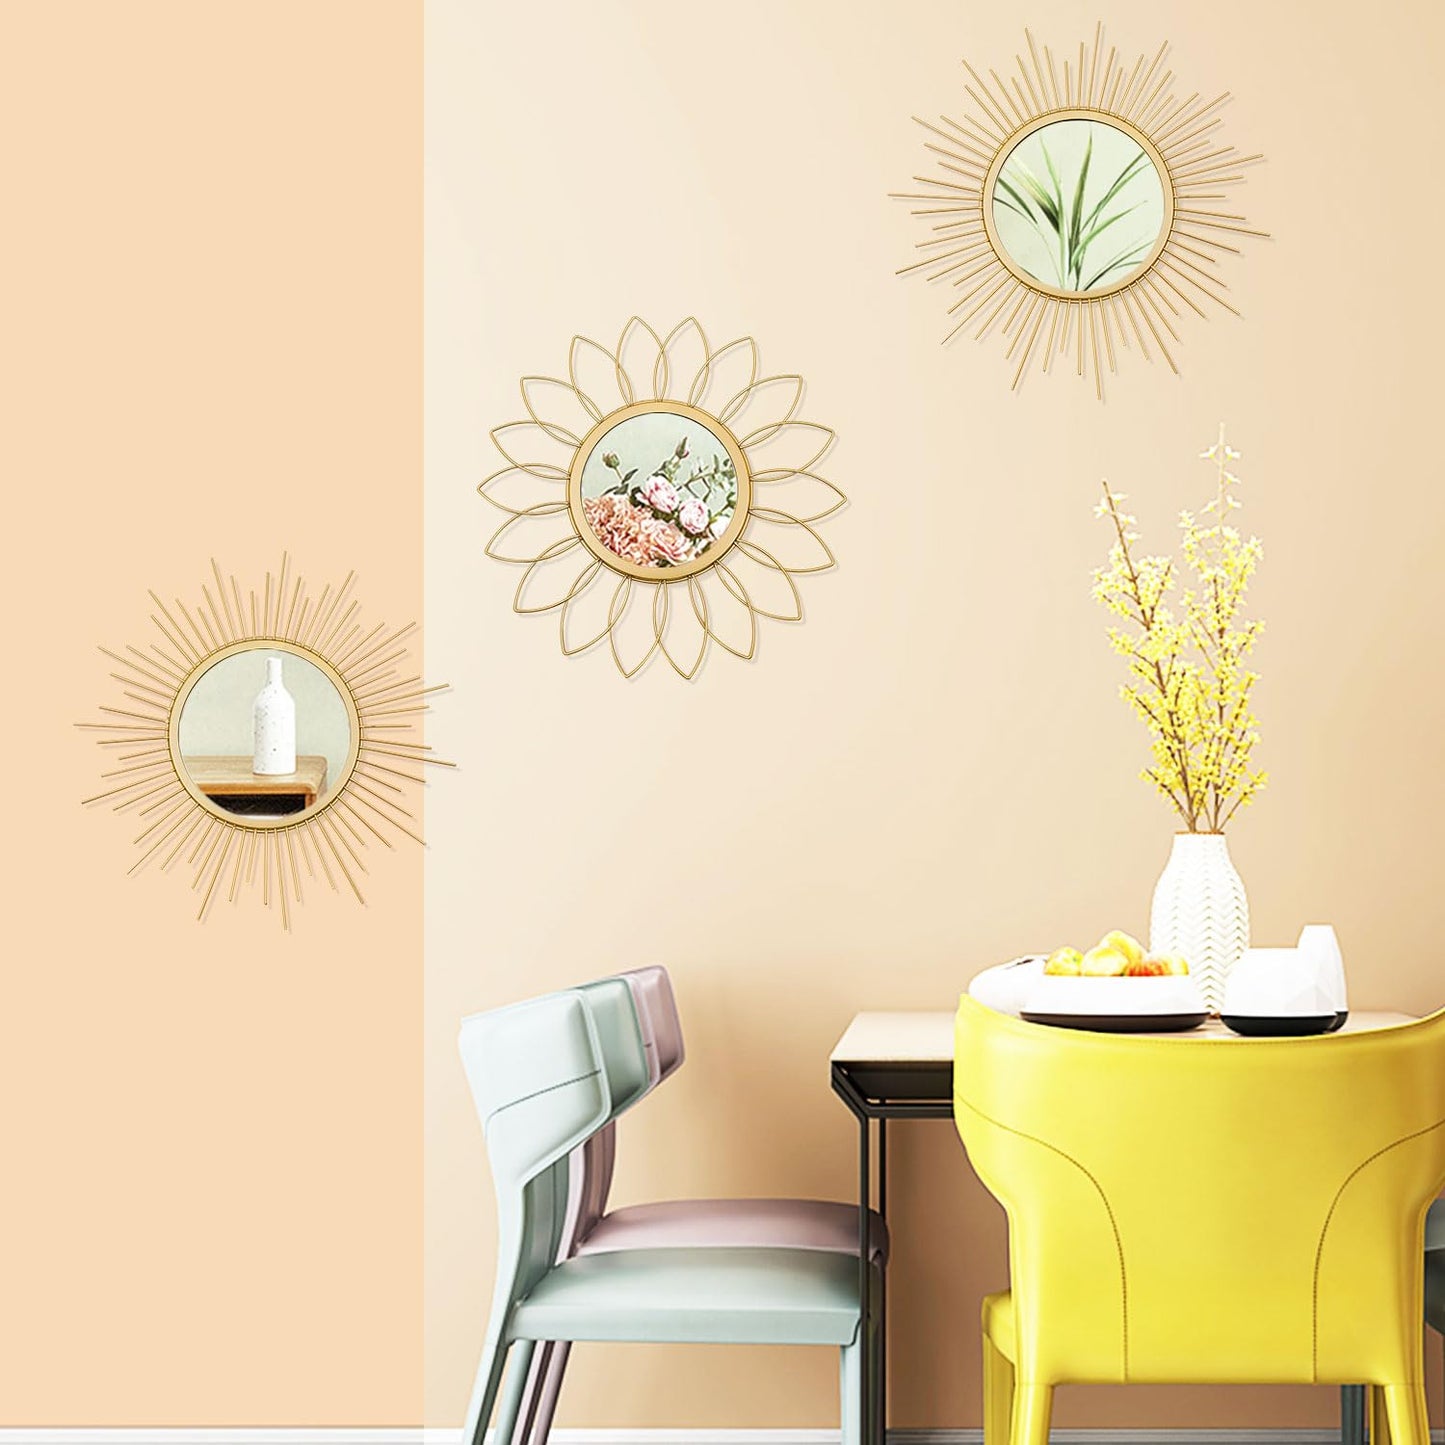 3 Pack Gold Mirrors for Wall Metal Sunburst Wall Mirrors Home Décor Decorative Hanging Wall Art for Living Room Bedroom Entryway